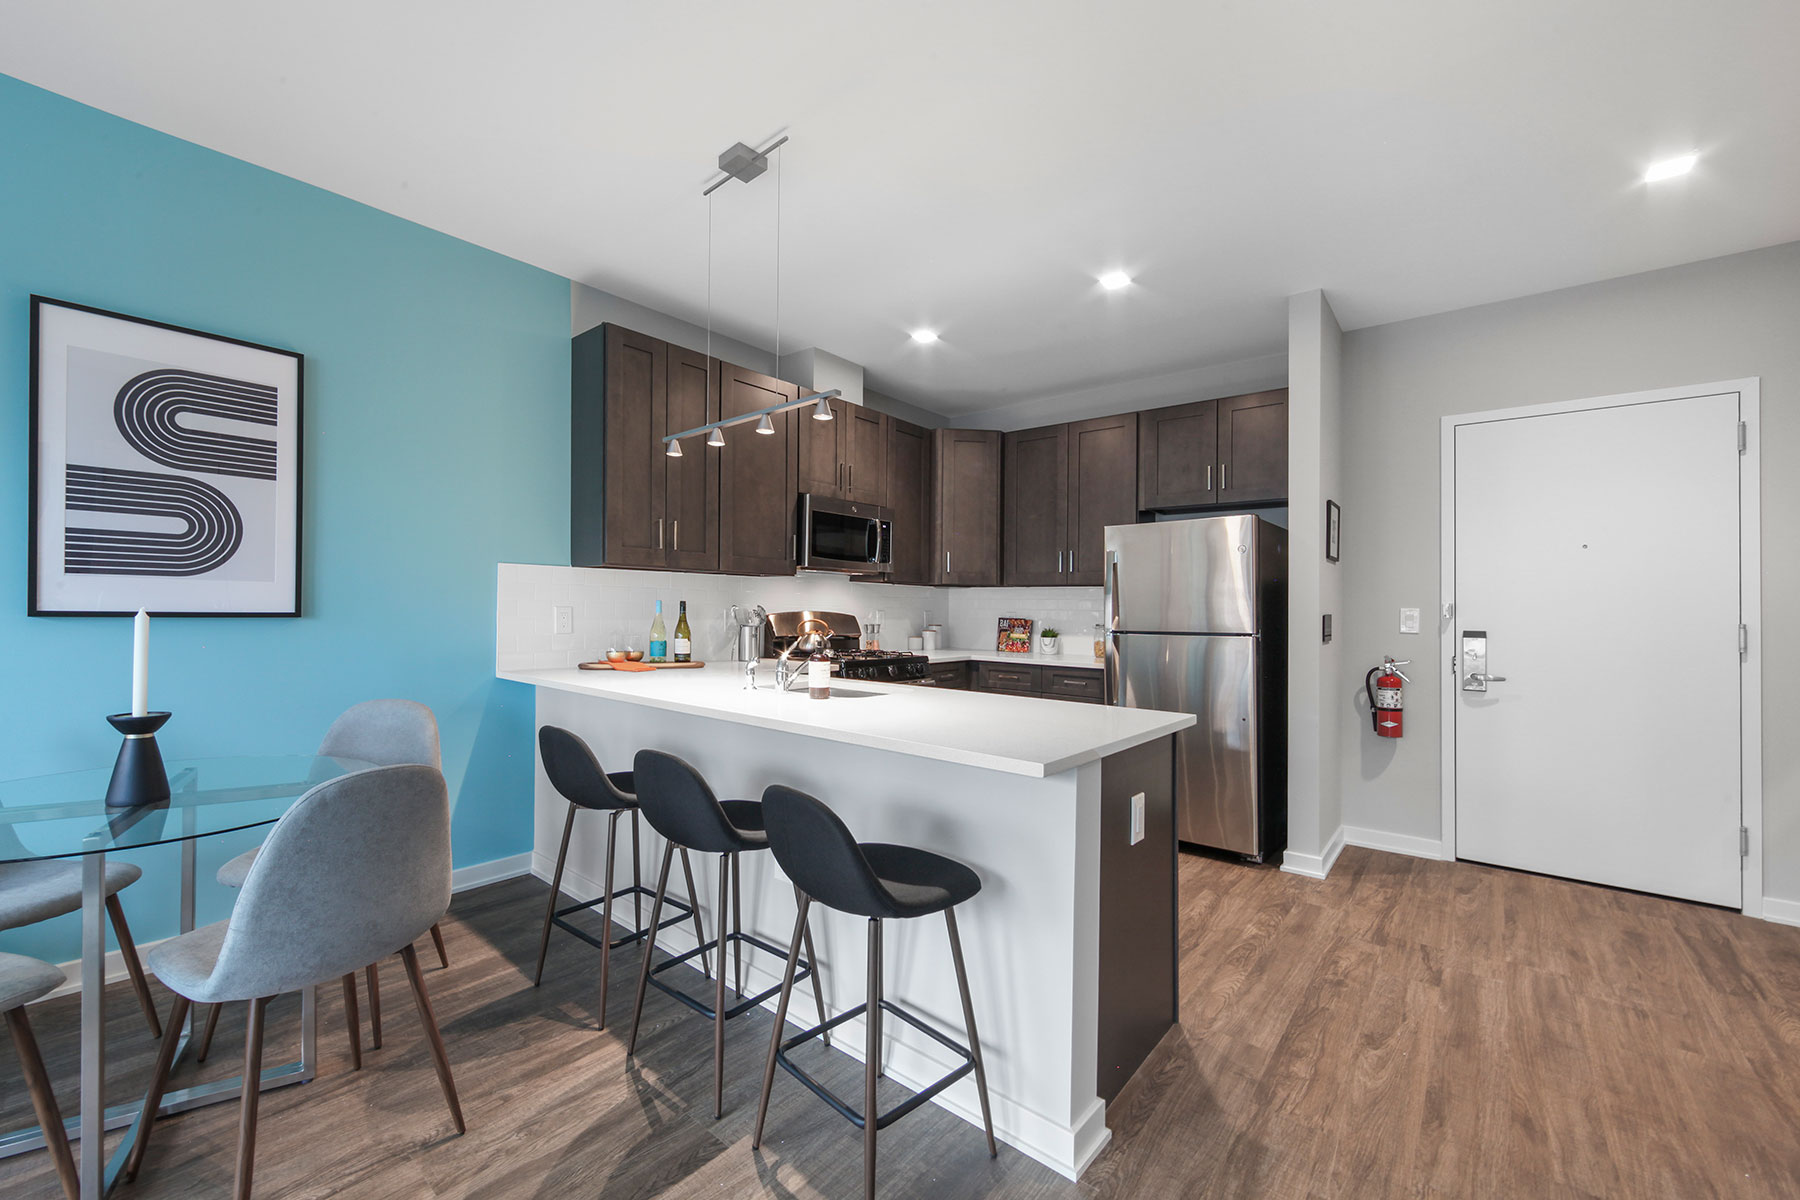 Bright modern kitchen and dine in seating near entrance, with barstools at counter, dark wood cabinetry, stainless steel appliances and modern fixtures and wood floors